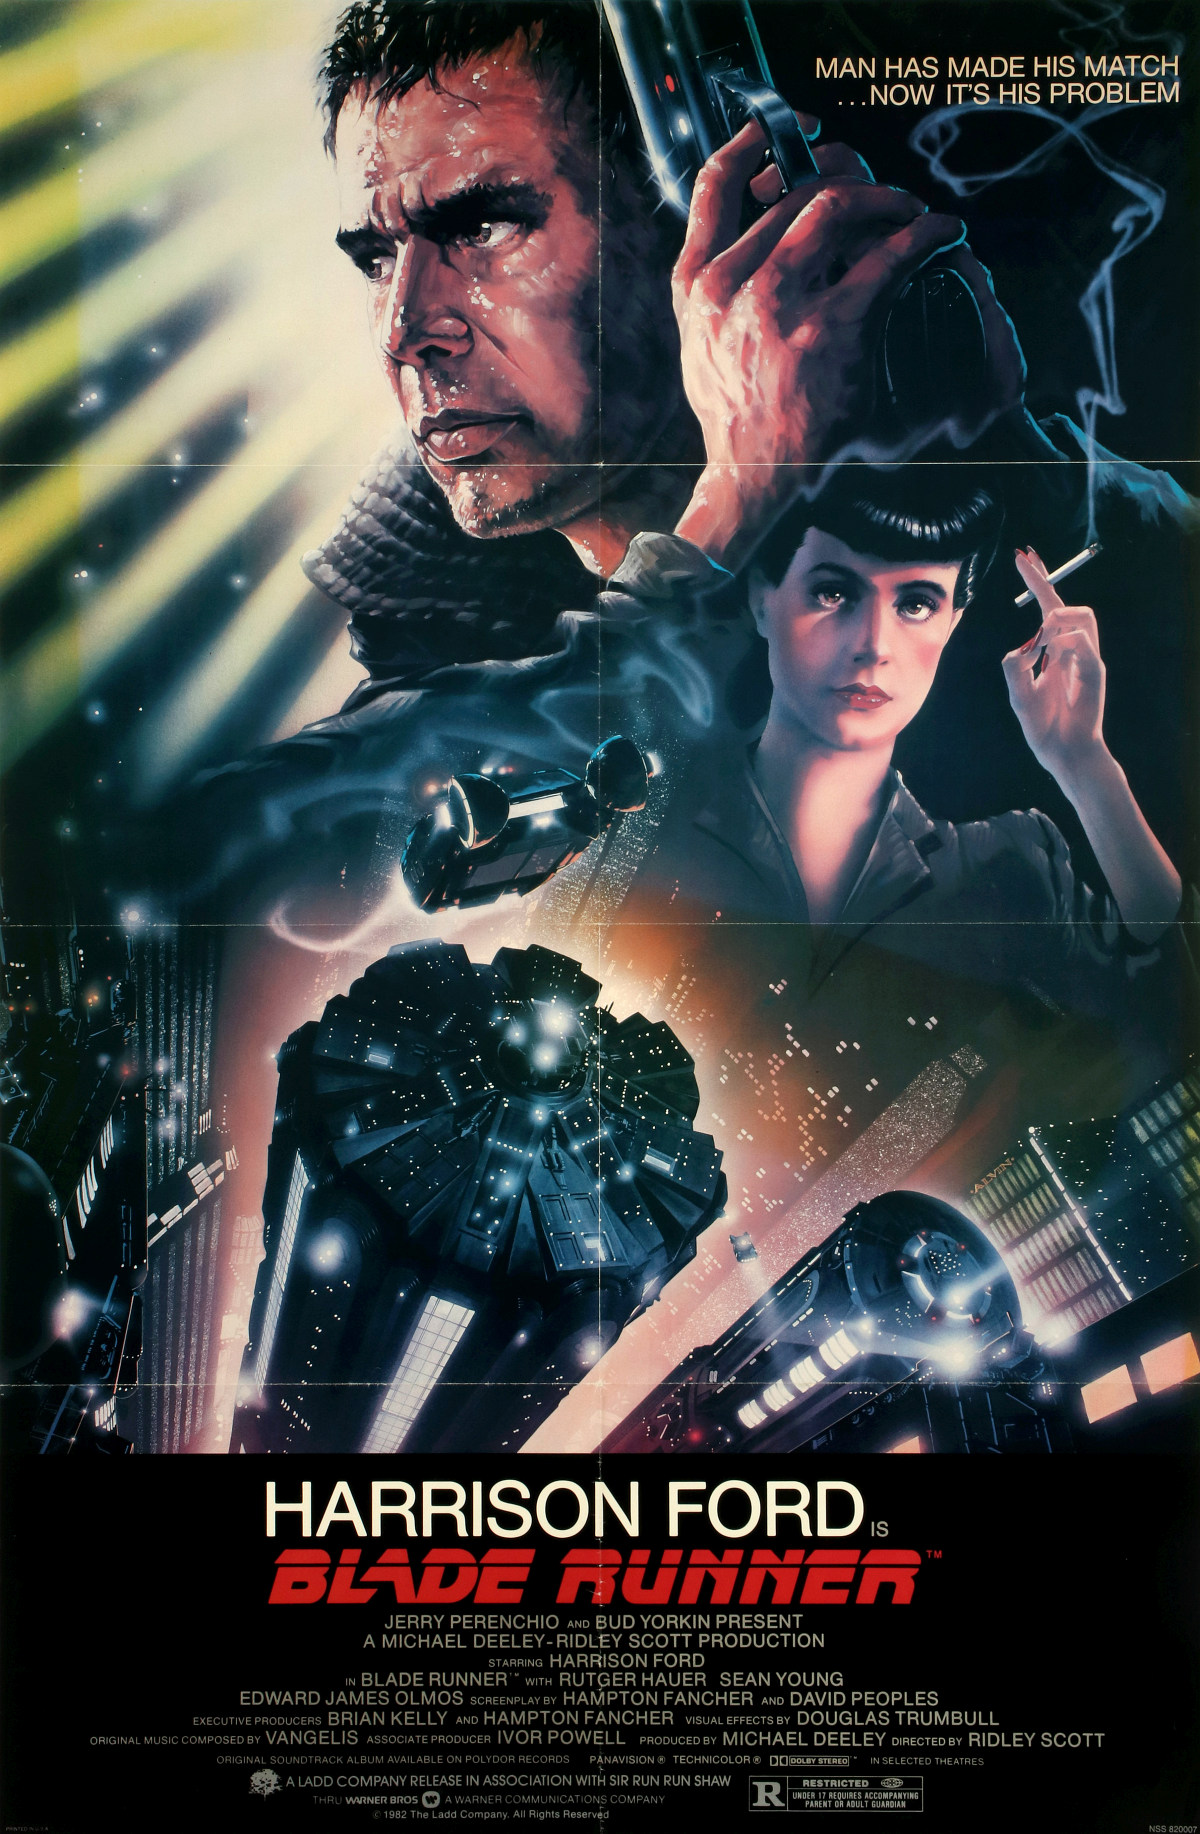 A 1982 'BLADE RUNNER' HARRISON FORD MOVIE POSTER